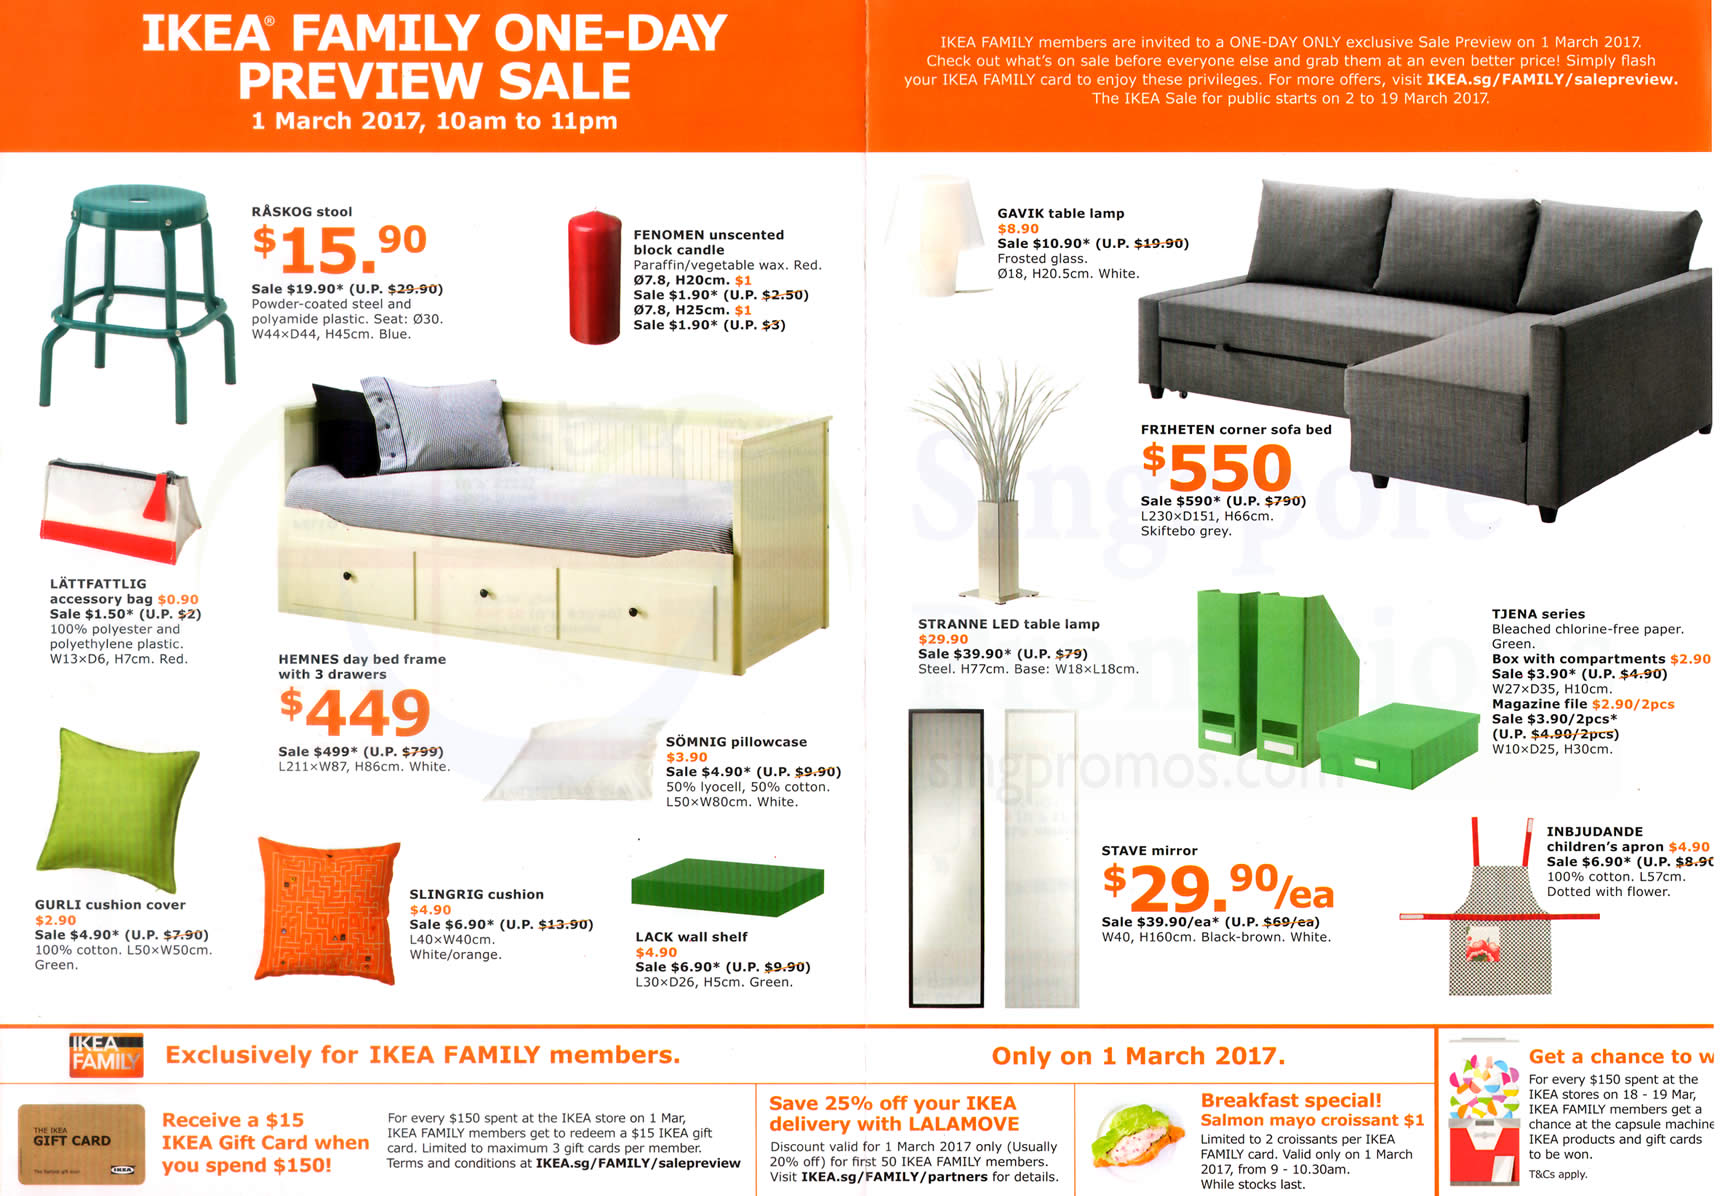 IKEA sale preview for Family members (free membership) on